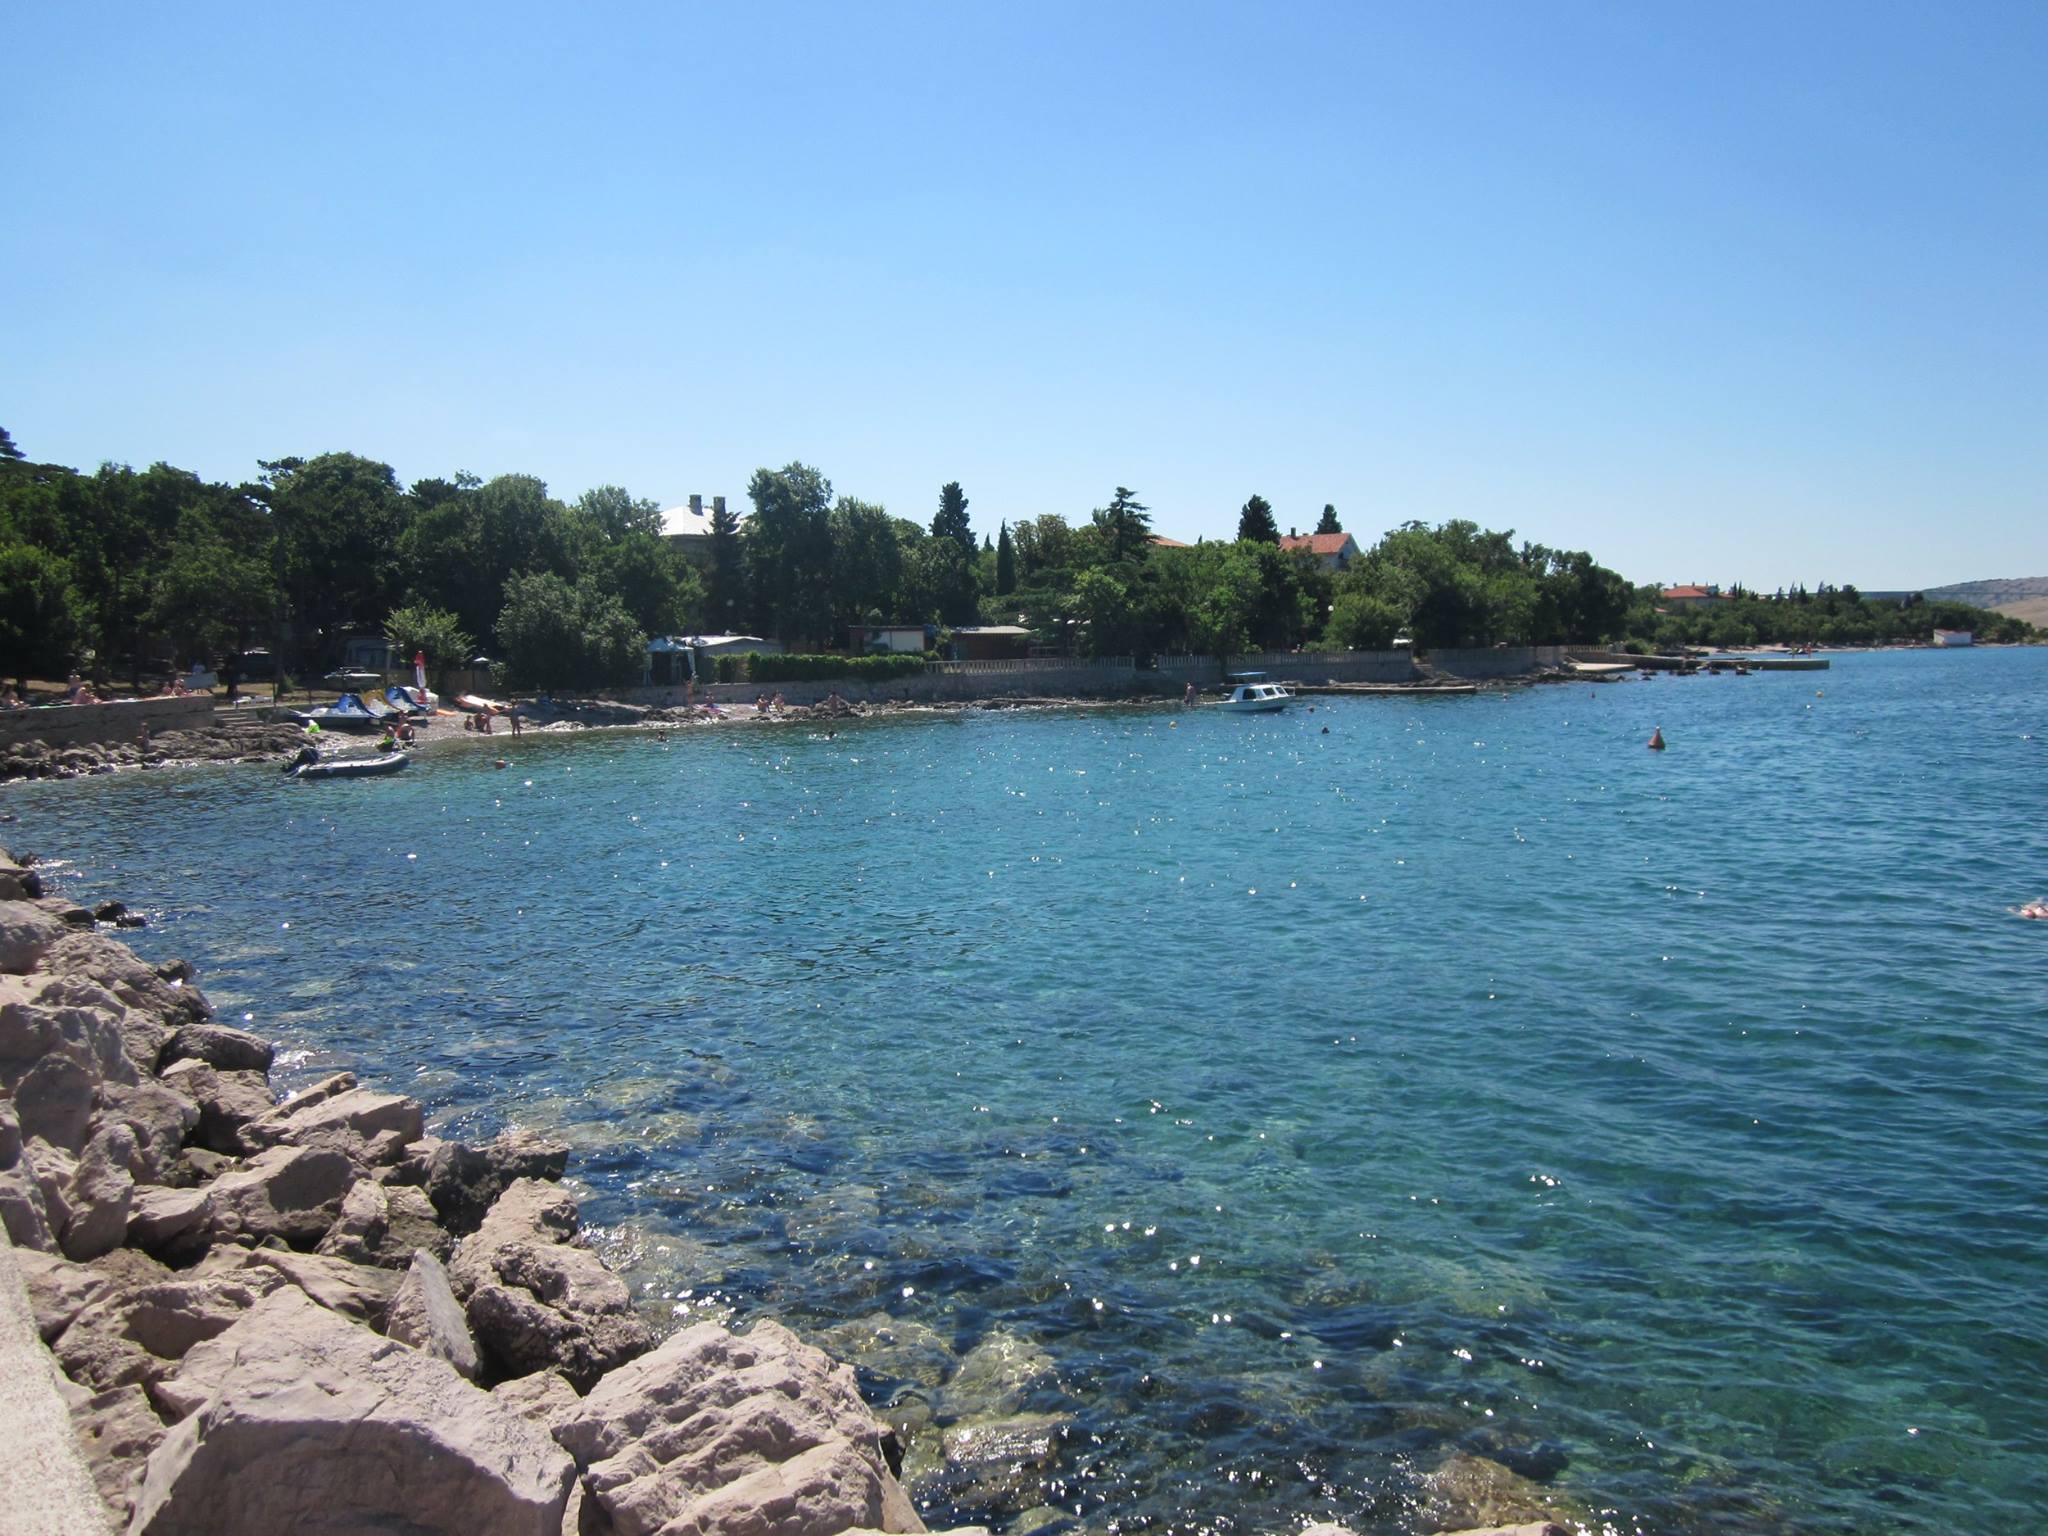 A view of the sea in Croatia, with rocks in the foreground and trees in the background